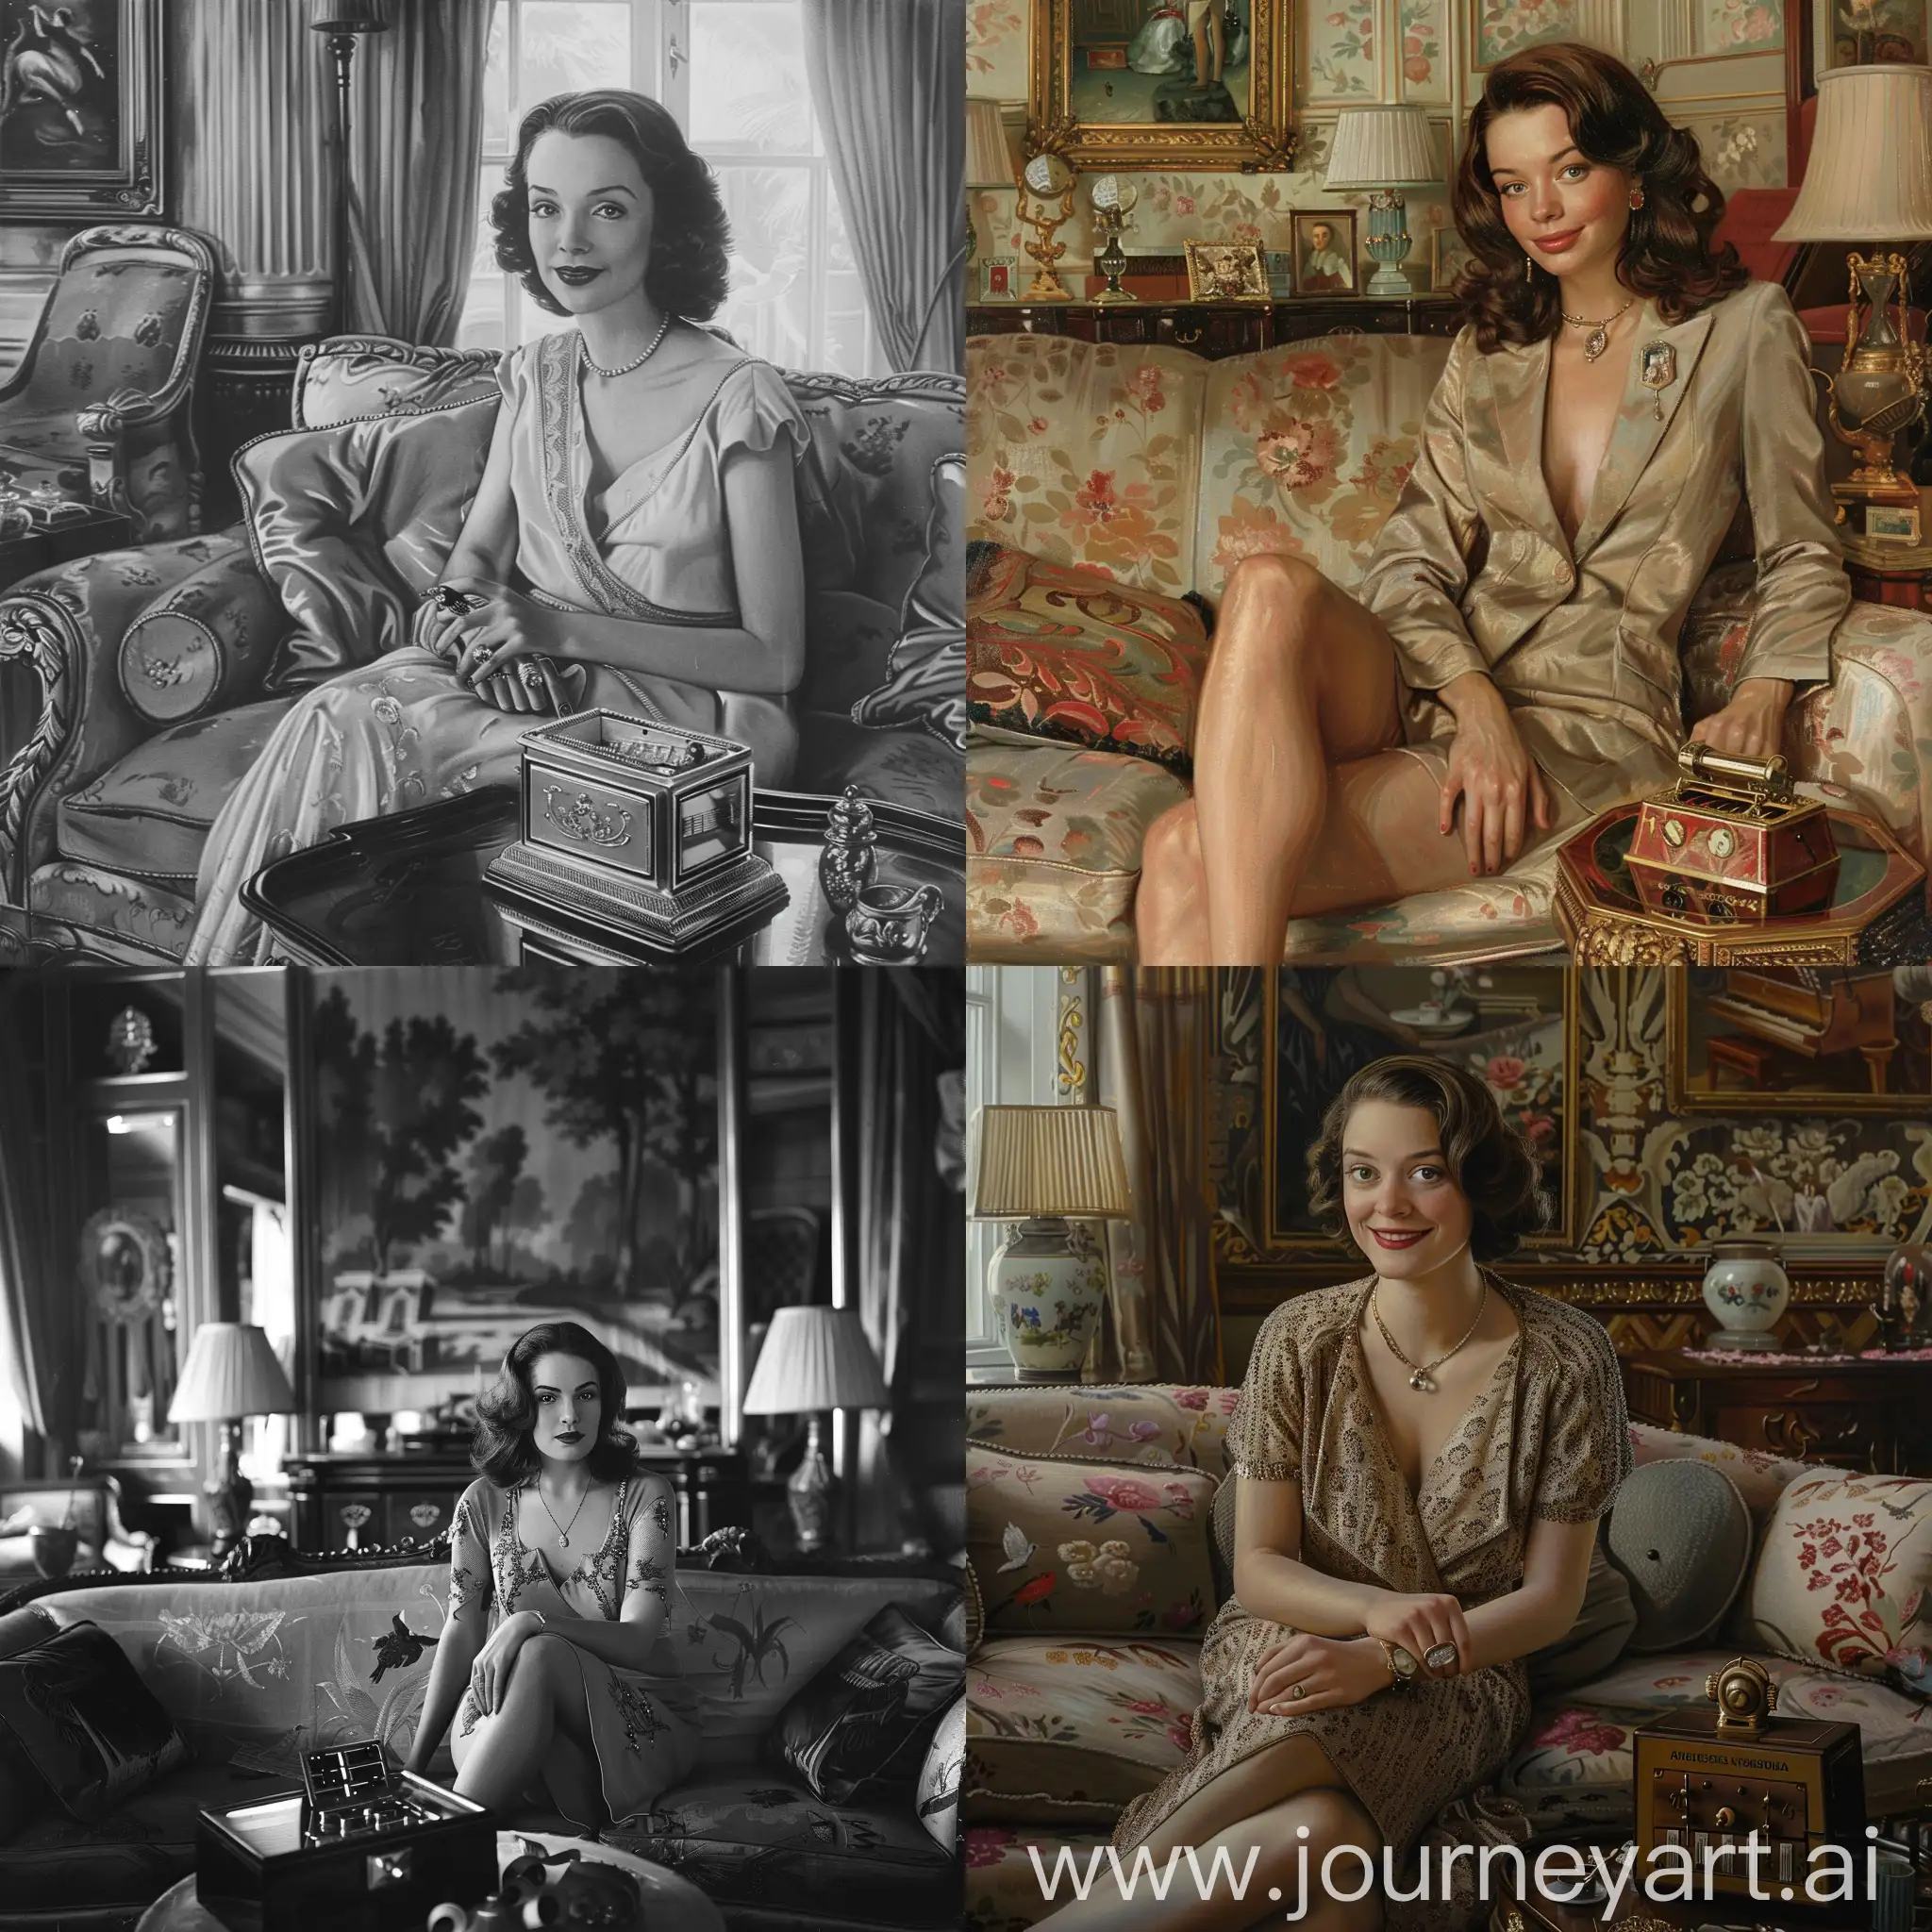 Elegant-Brunette-Woman-in-1930s-English-Living-Room-with-Mischievous-Gaze-and-Music-Box